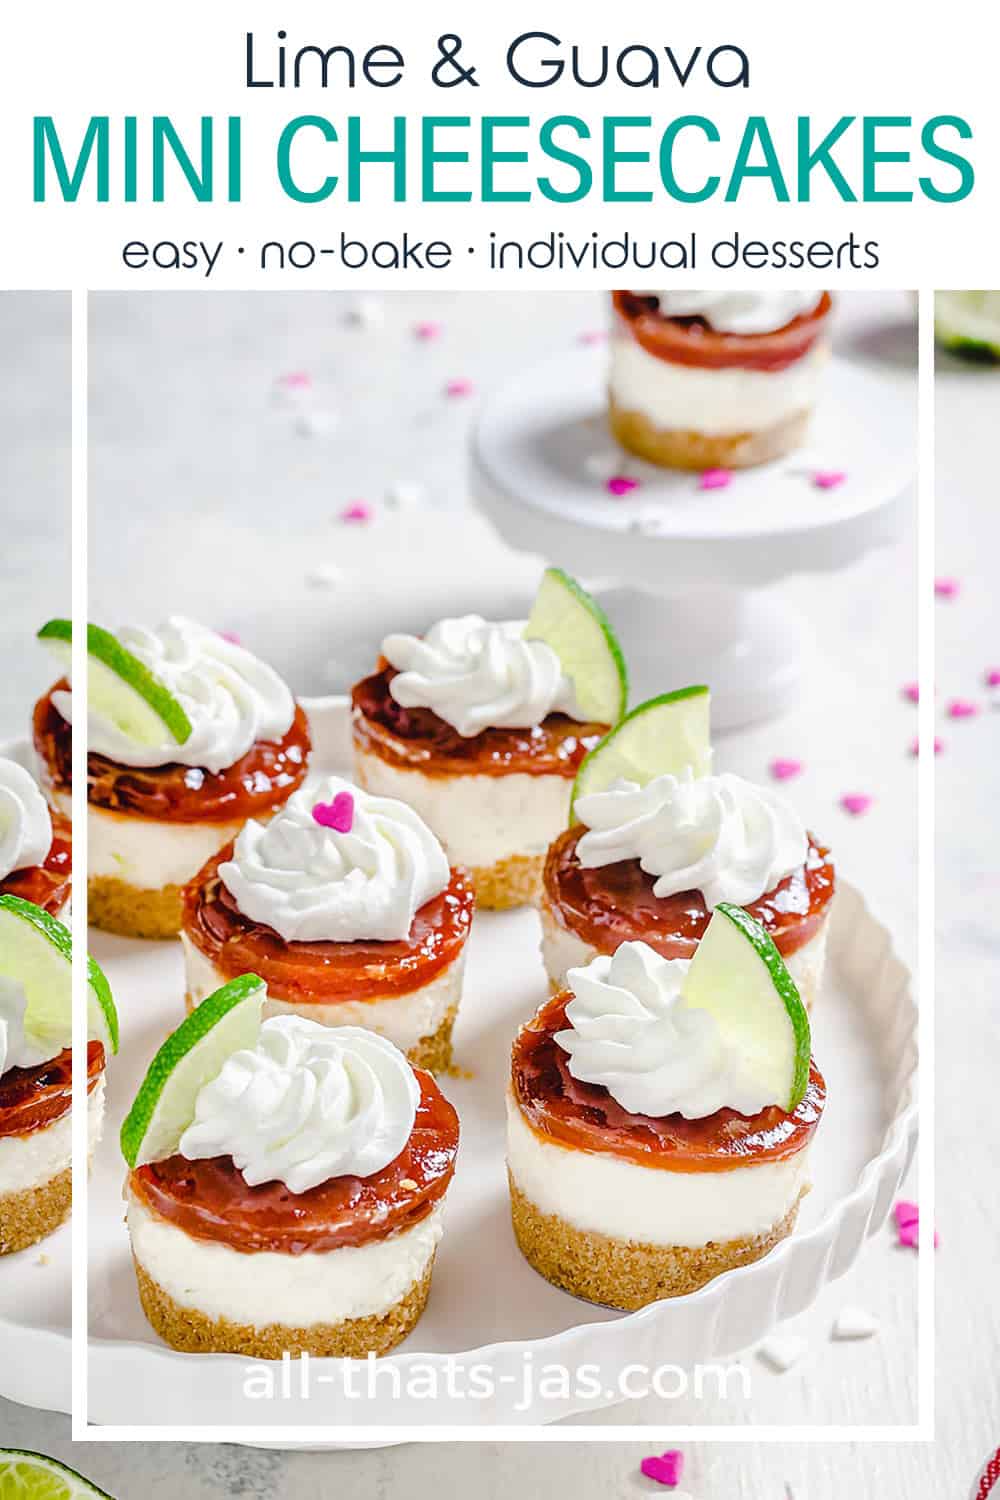 A group of mini cheesecakes with text overlay